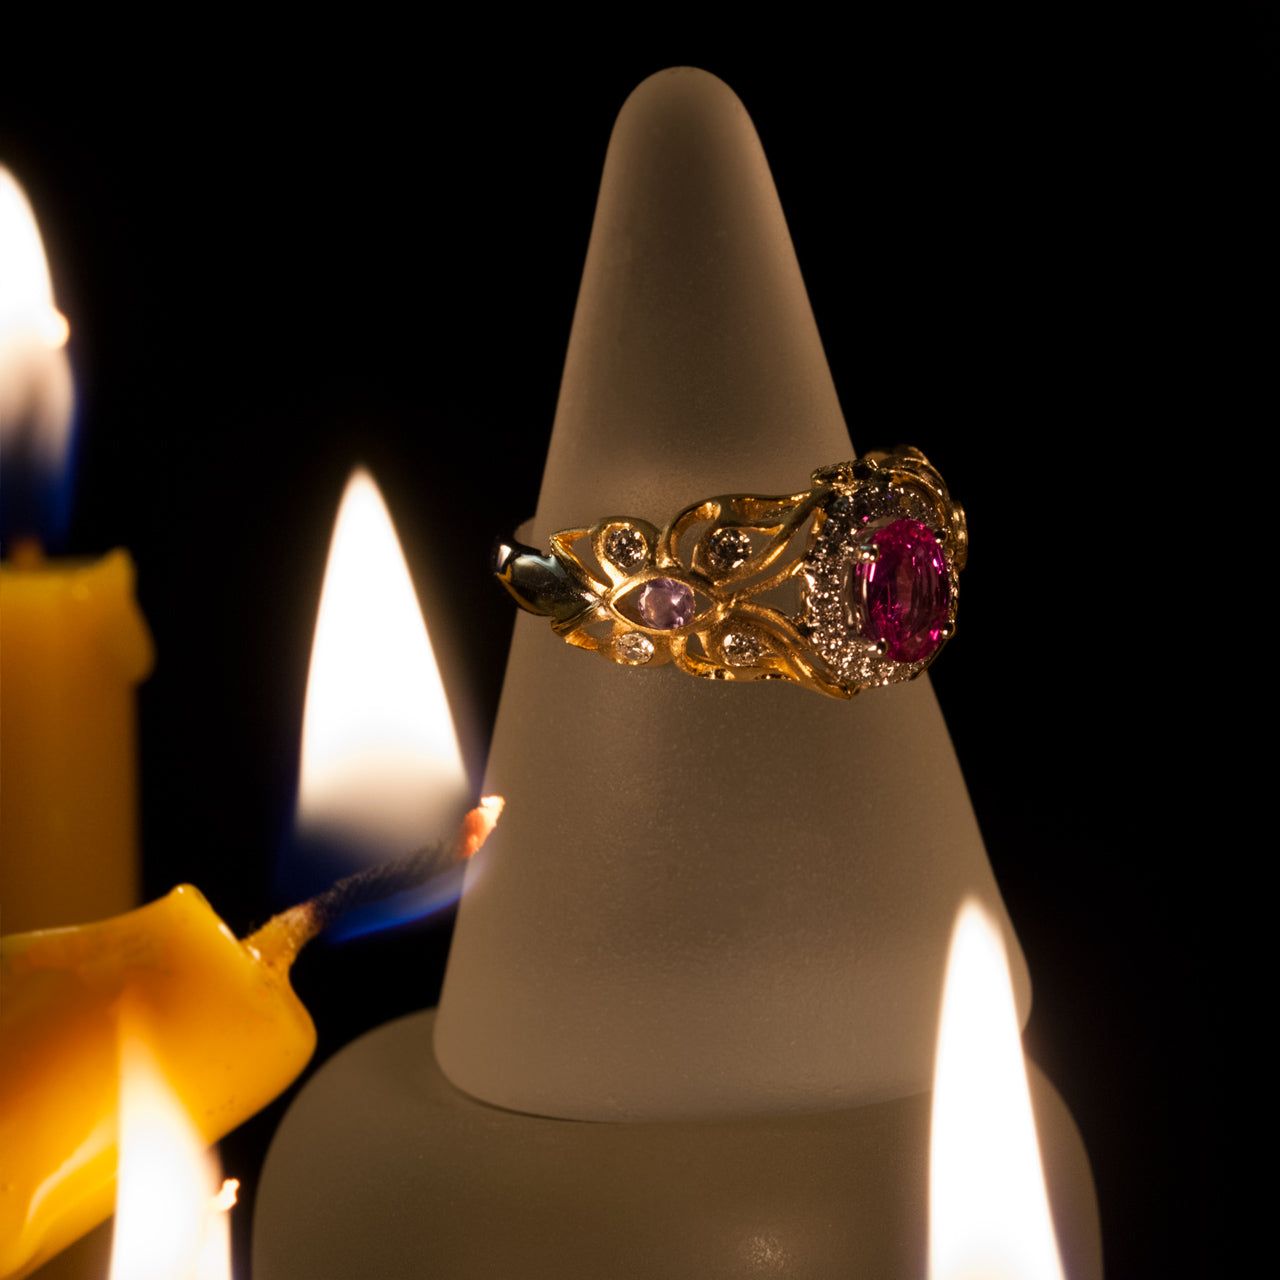 0.74ct pink sapphire ring in 18k gold setting displayed on a candle for ambiance